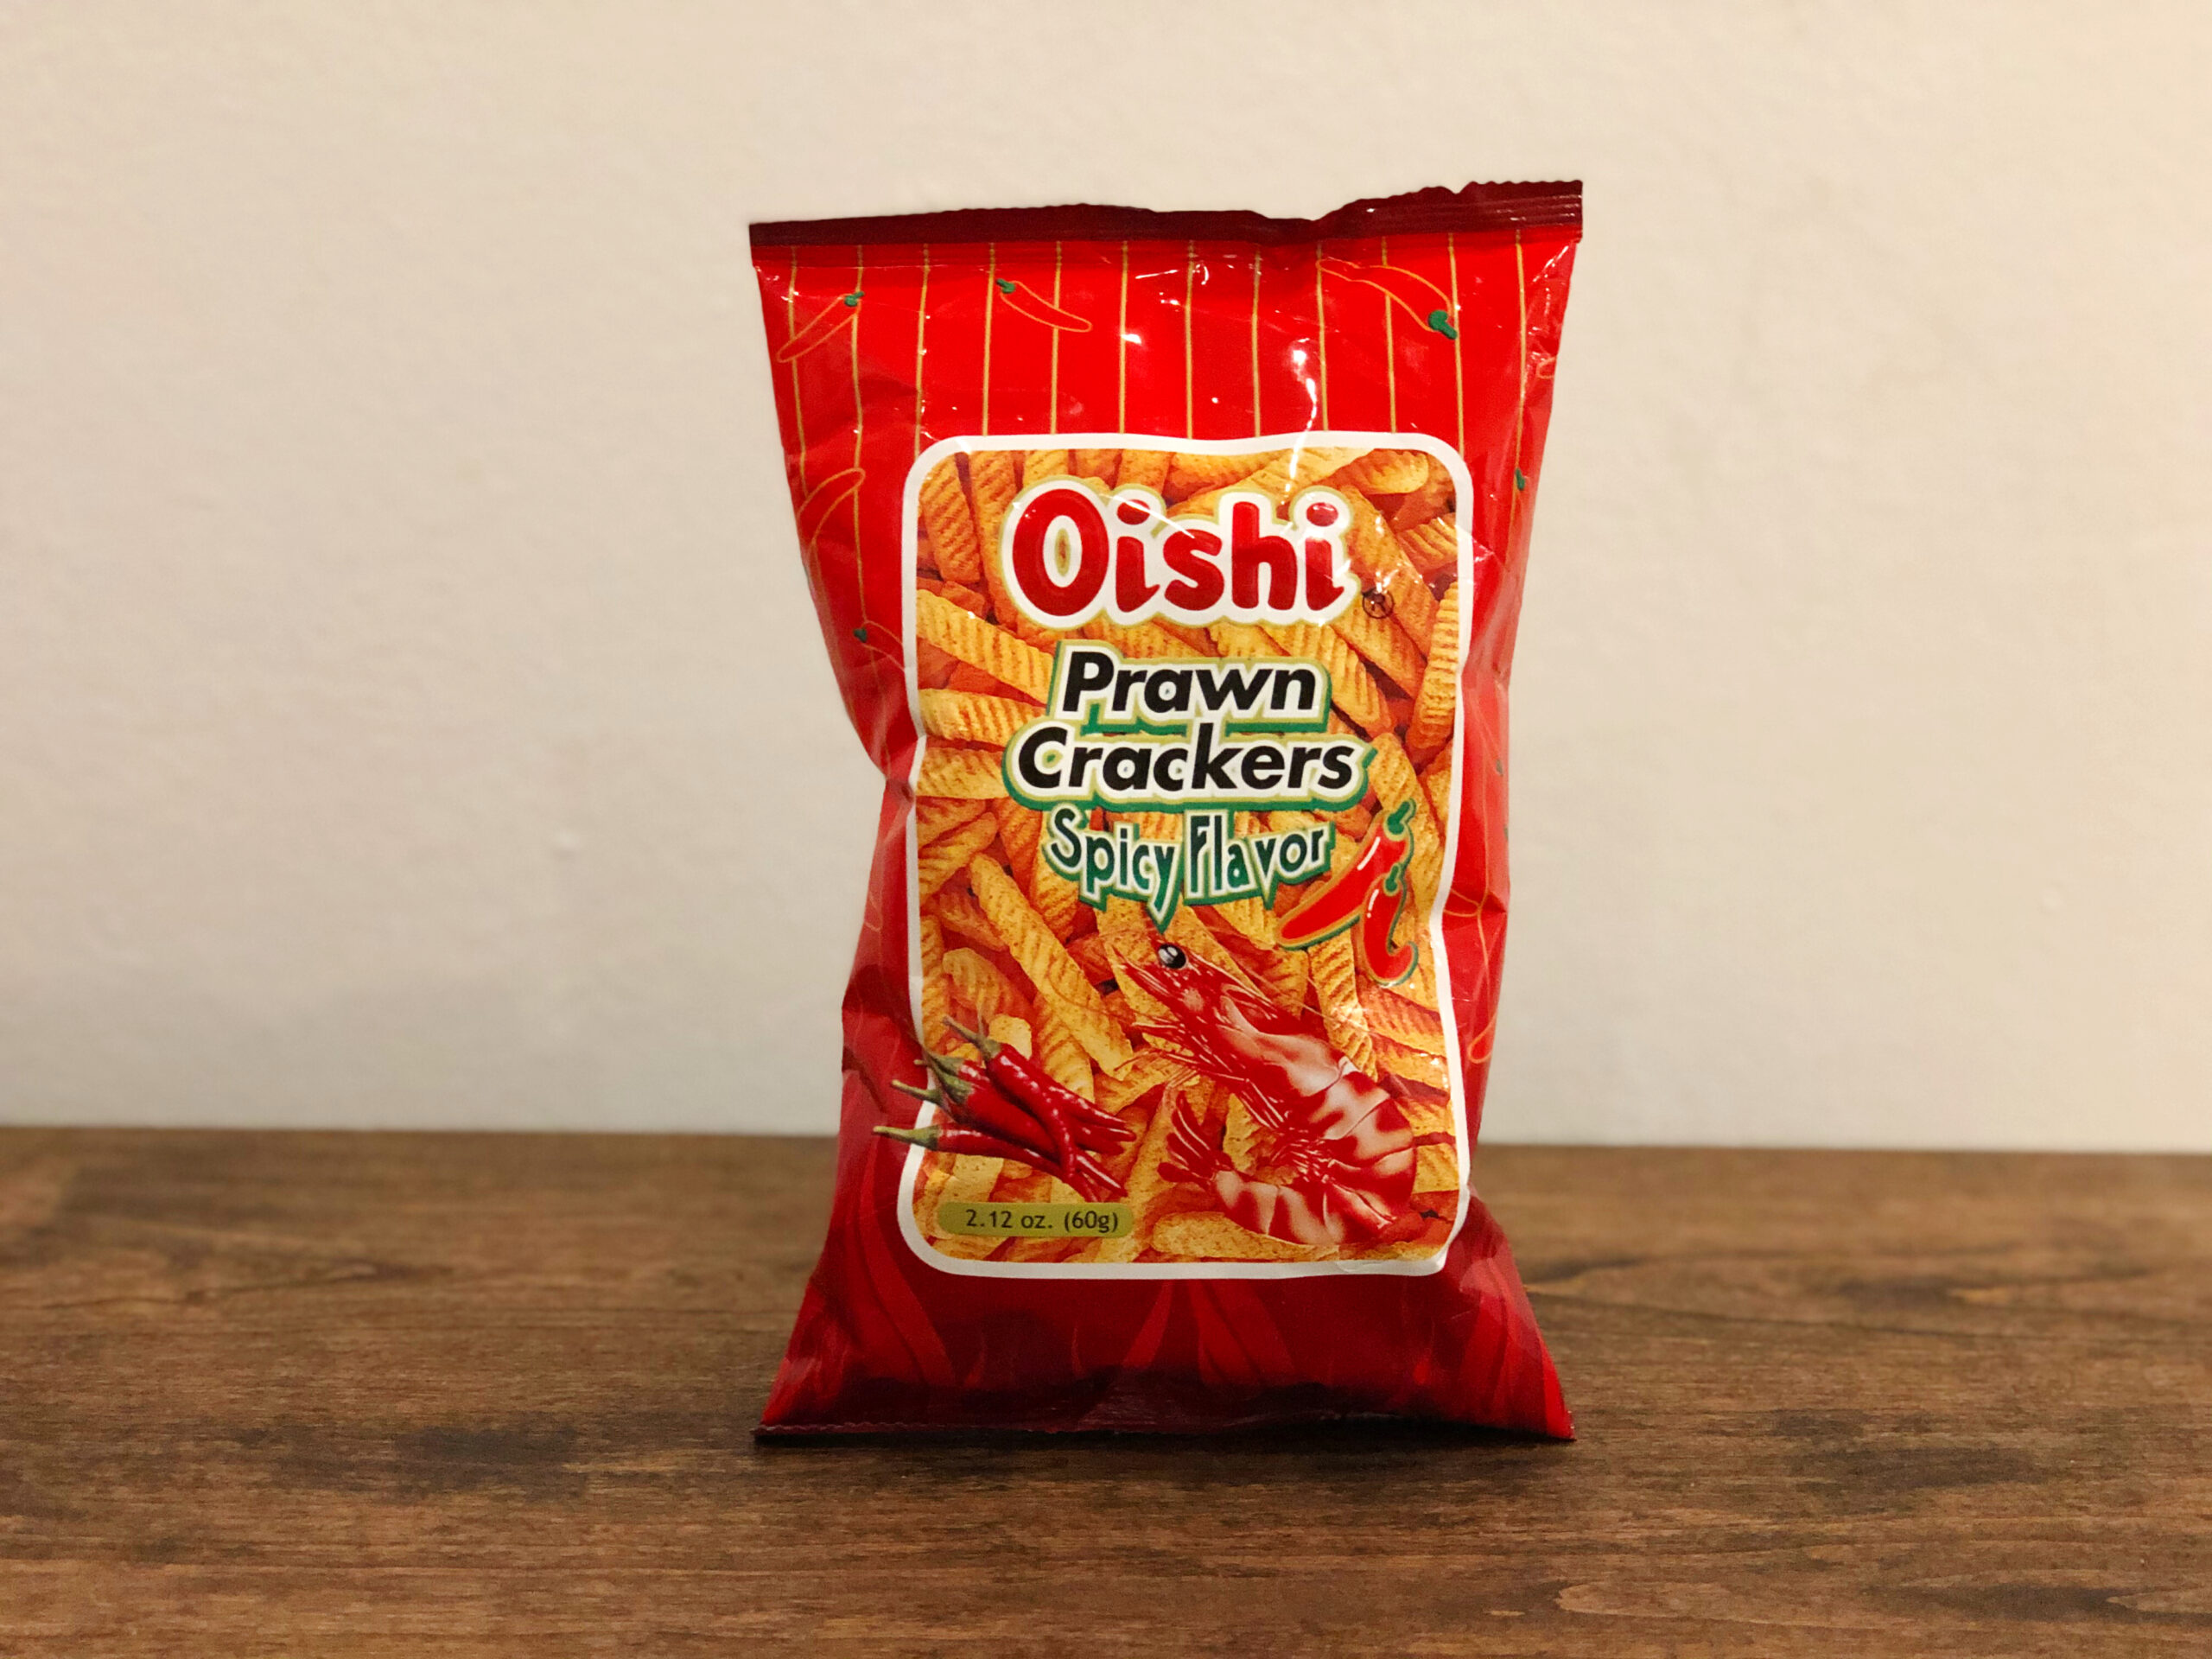 Oishi Prawn Crackers: Spicy Flavor - Classic Filipino Snack Review